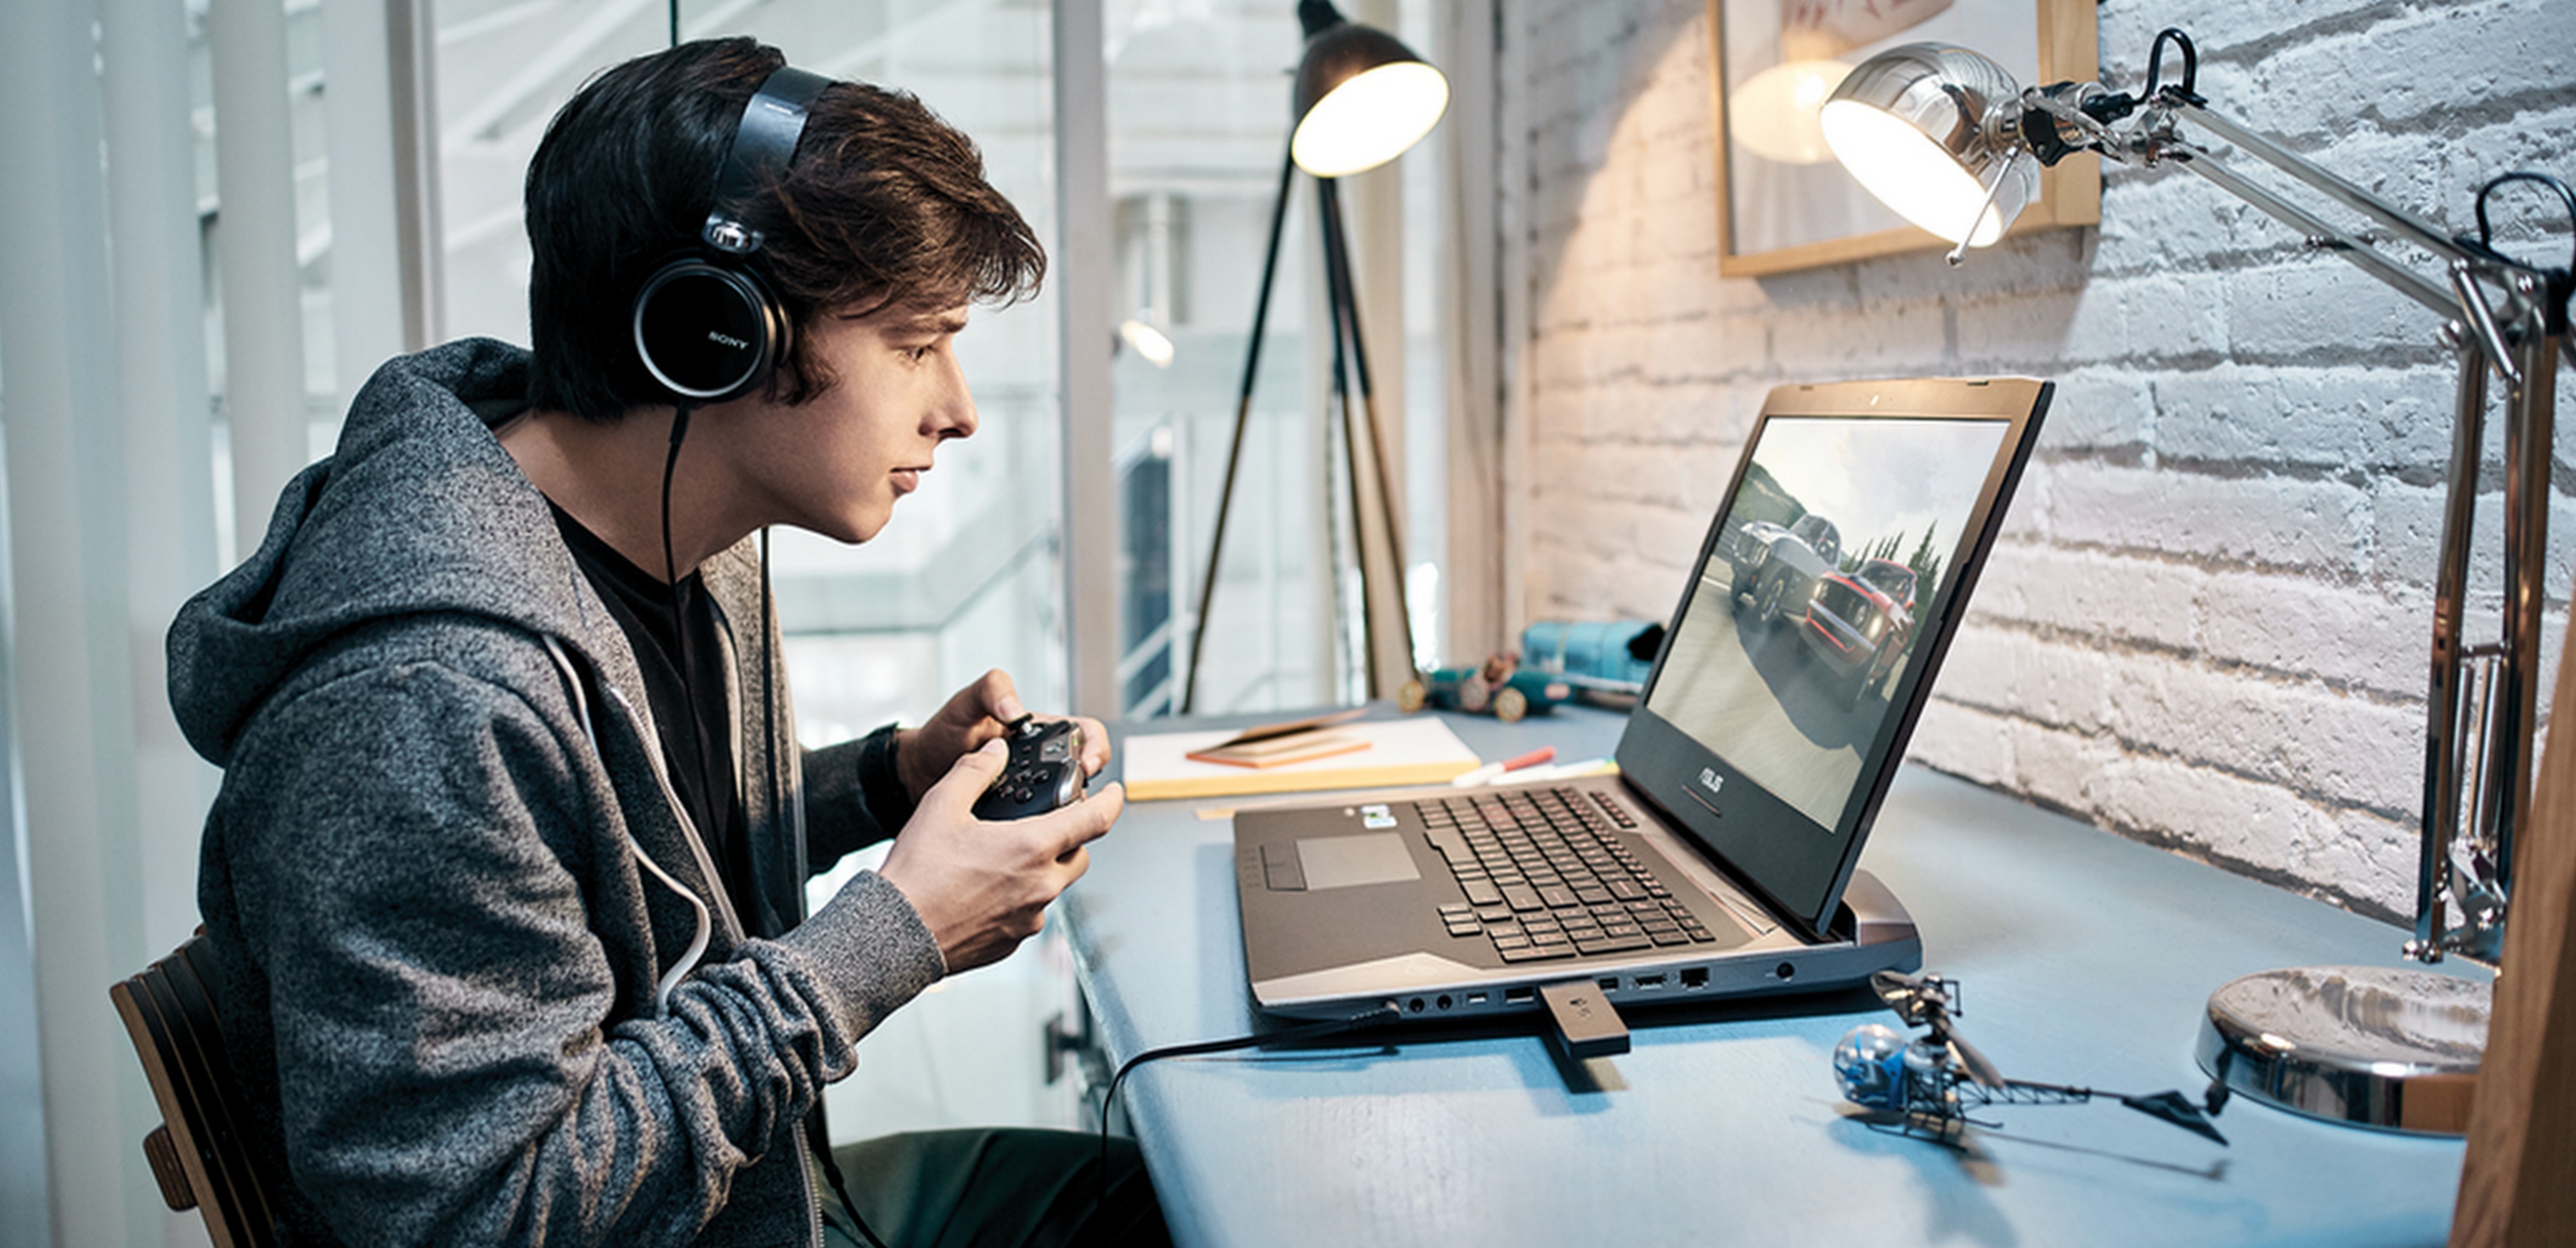 Boy sitting at a desk wearing headphones and holding an Xbox controller, gaming on a Windows 10 PC